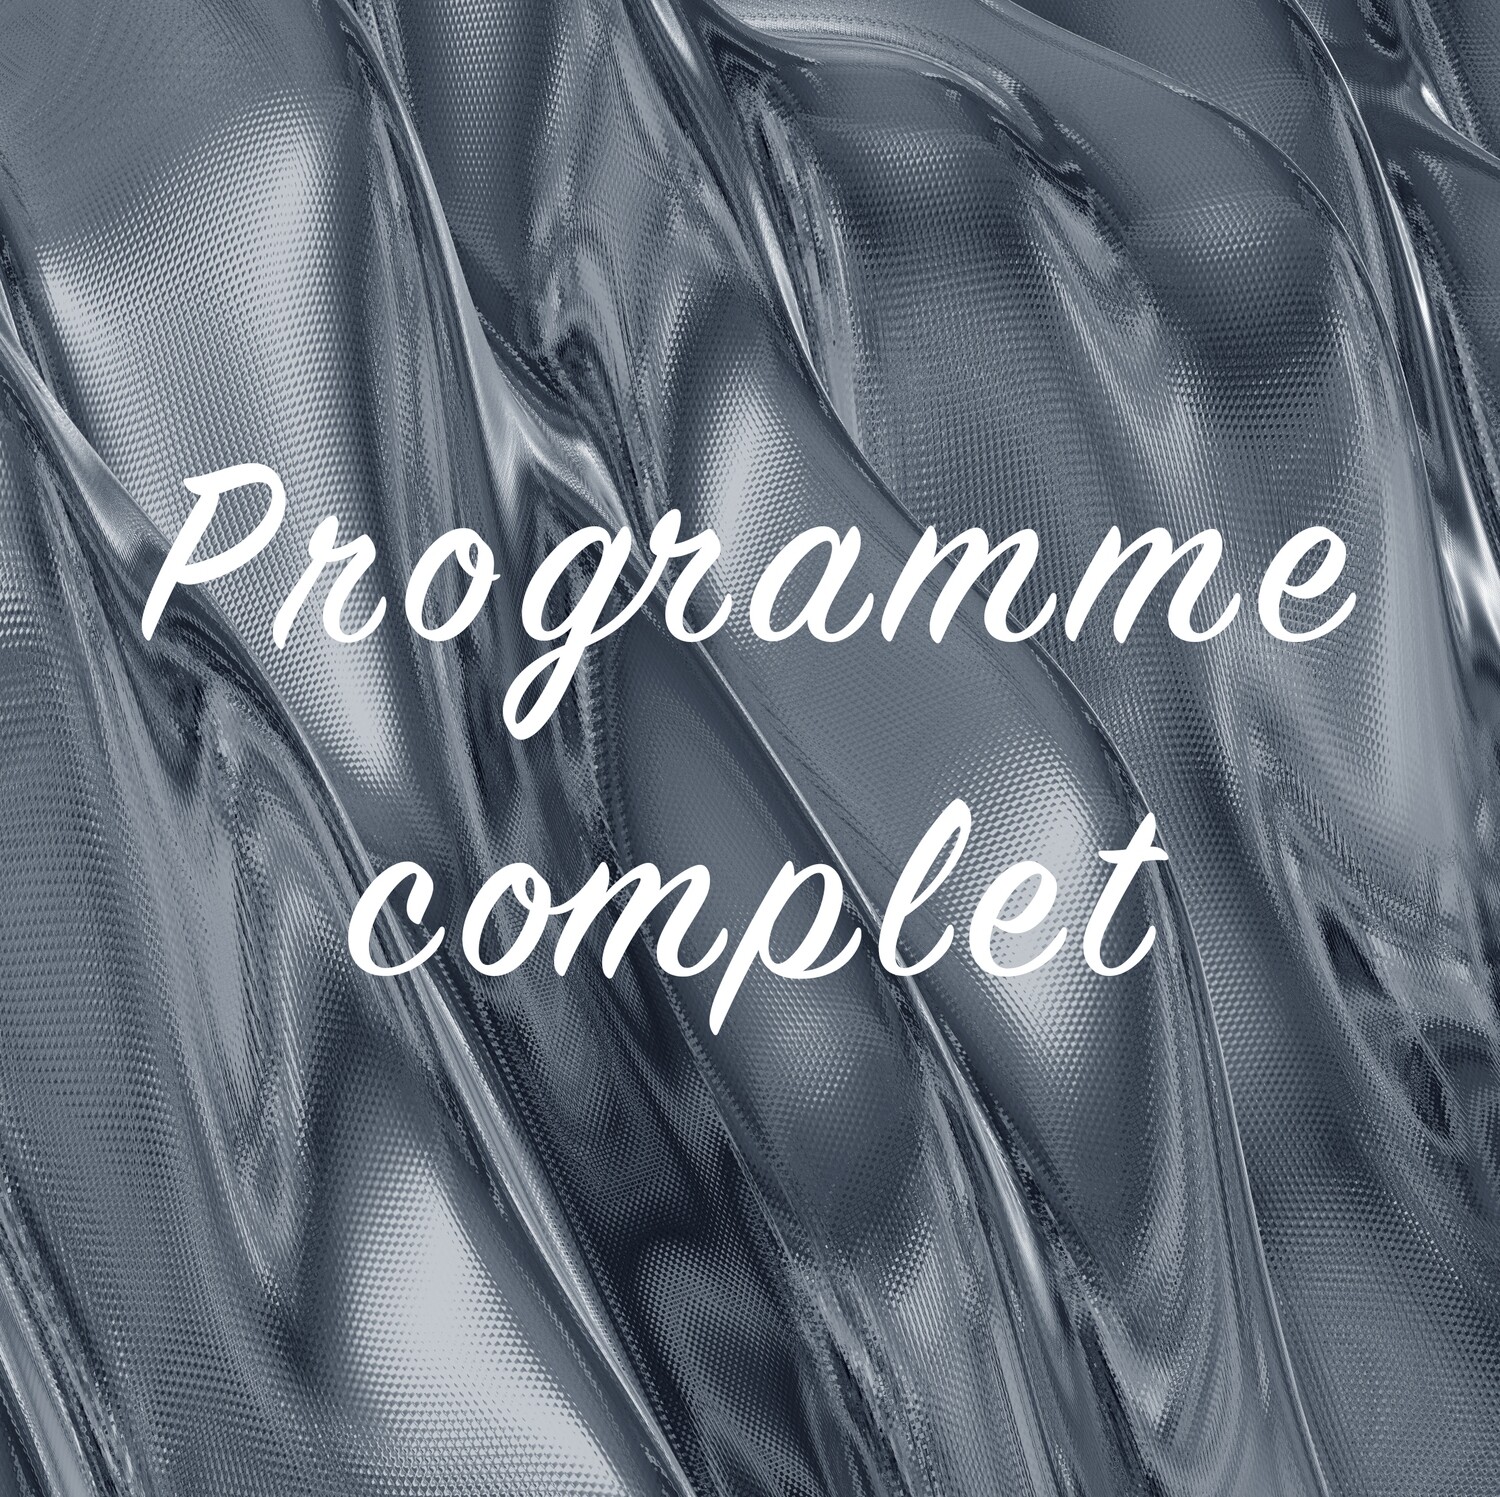 Programme complet - 6 mois